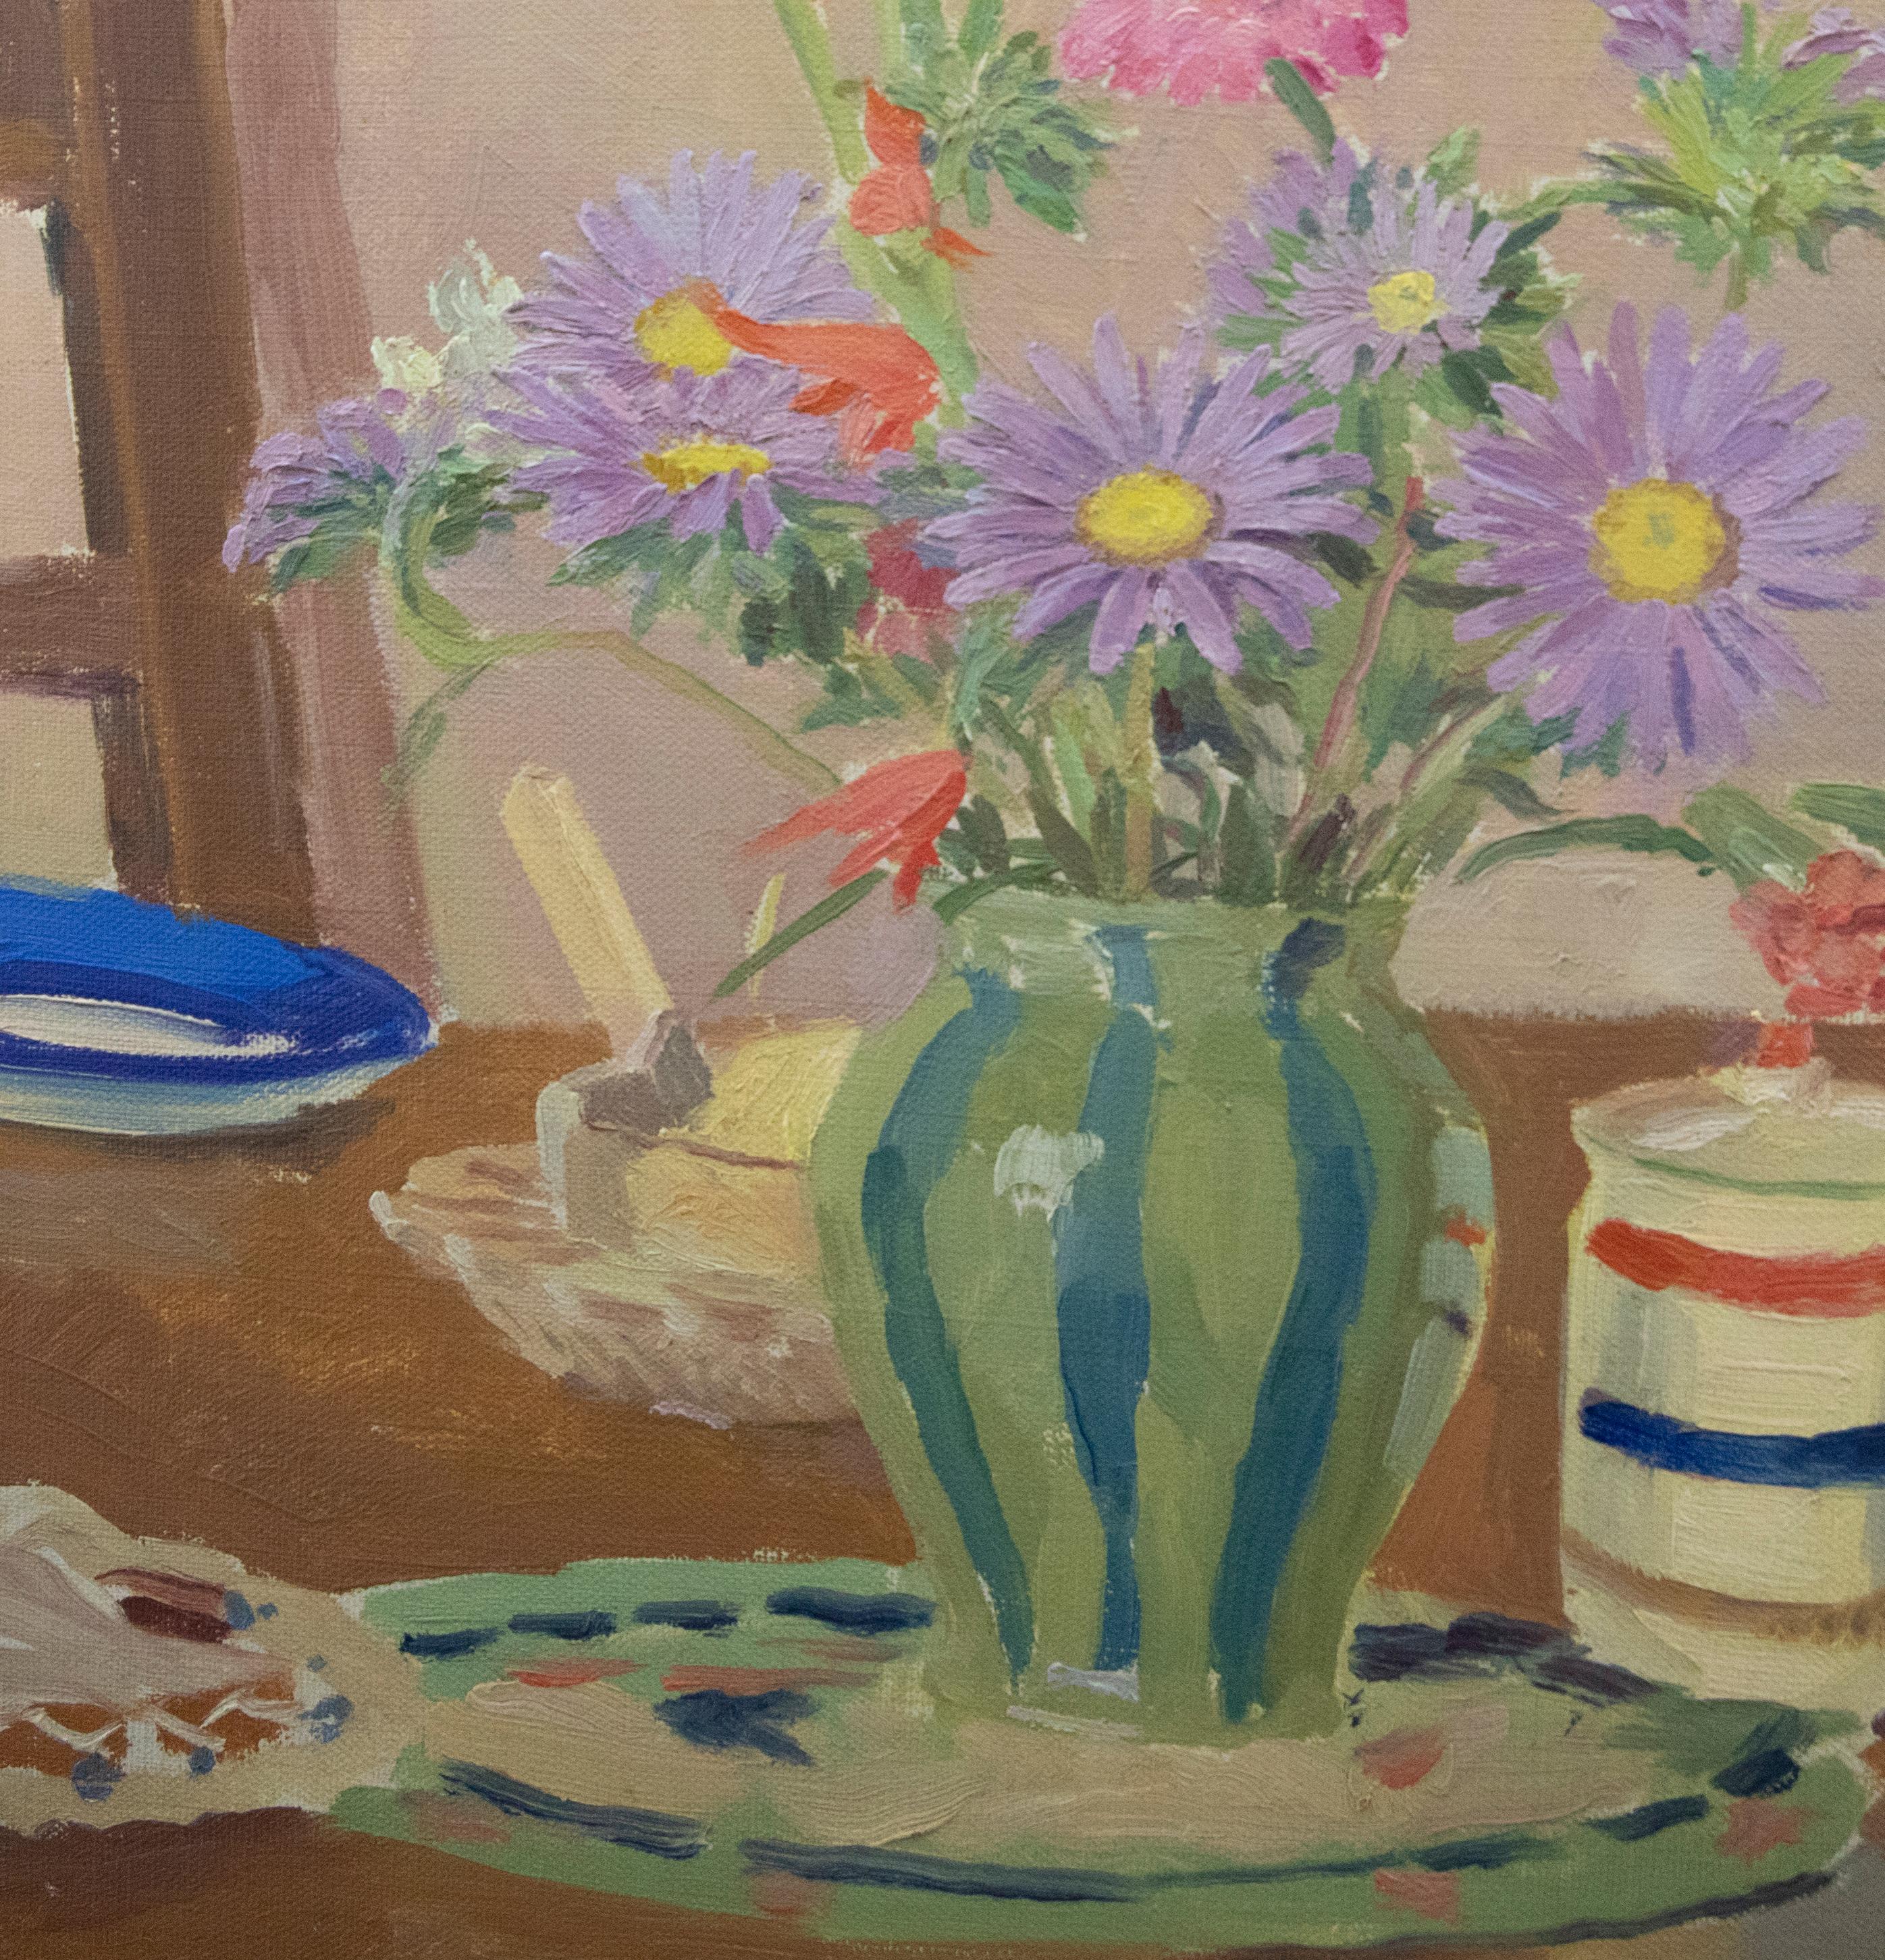 A delightful still life study depicting a striped glass holding asters in the center of a dining table. The artist uses a soft palette and fun patterns to capture this quaint but charismatic composition with a painterly finish. Unsigned. On canvas.